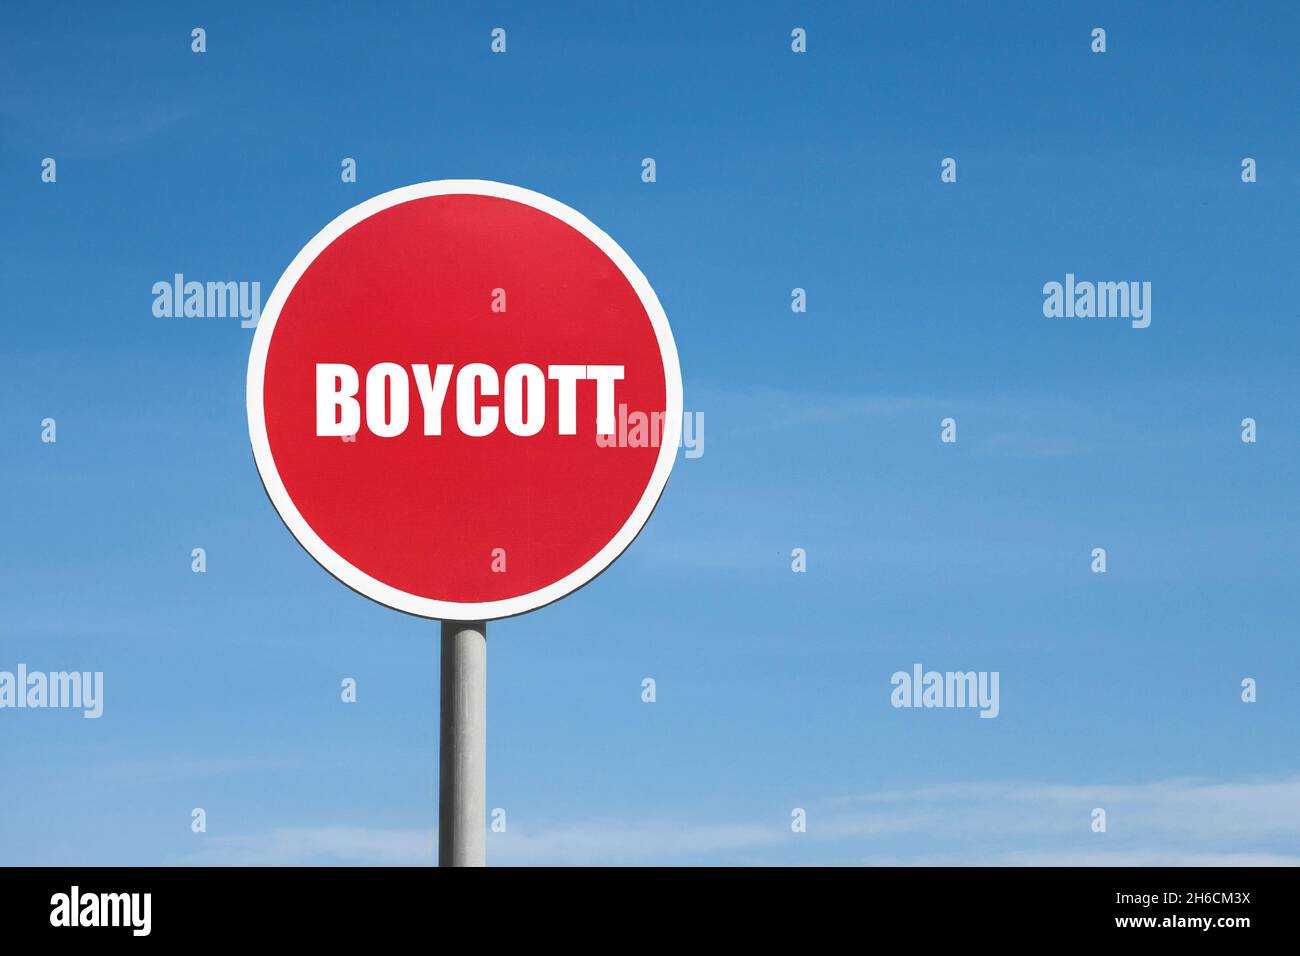 Boycott sign in red round frame on sky background Stock Photo